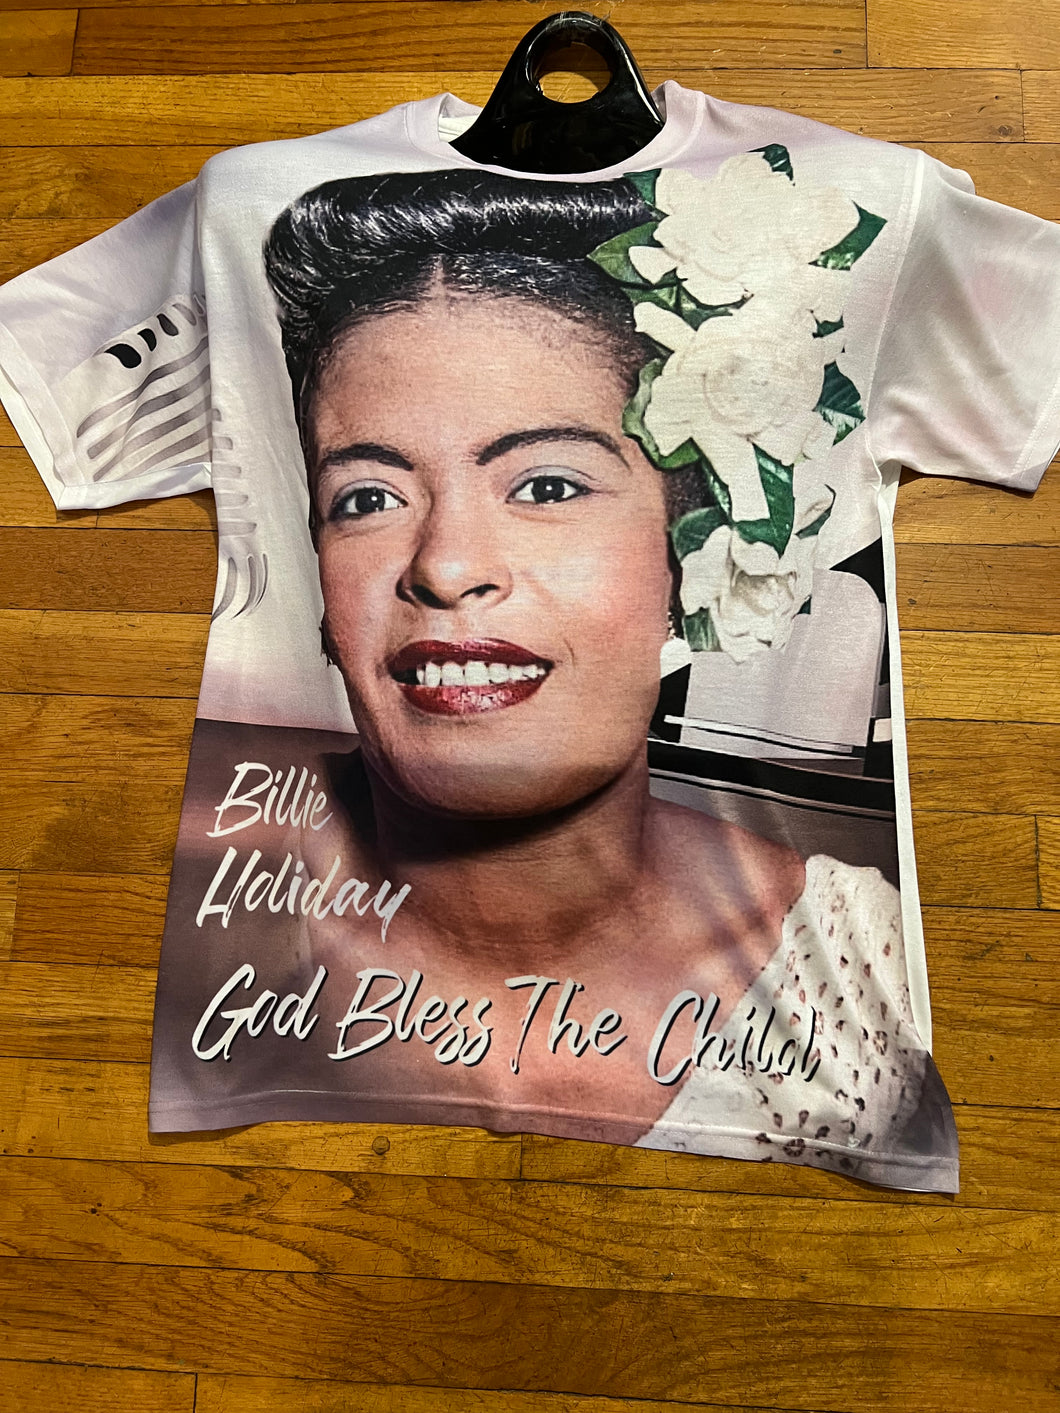 NEW!!! Billy Holiday God Bless the Child Jerzees/ T- Shirt Regular cuts